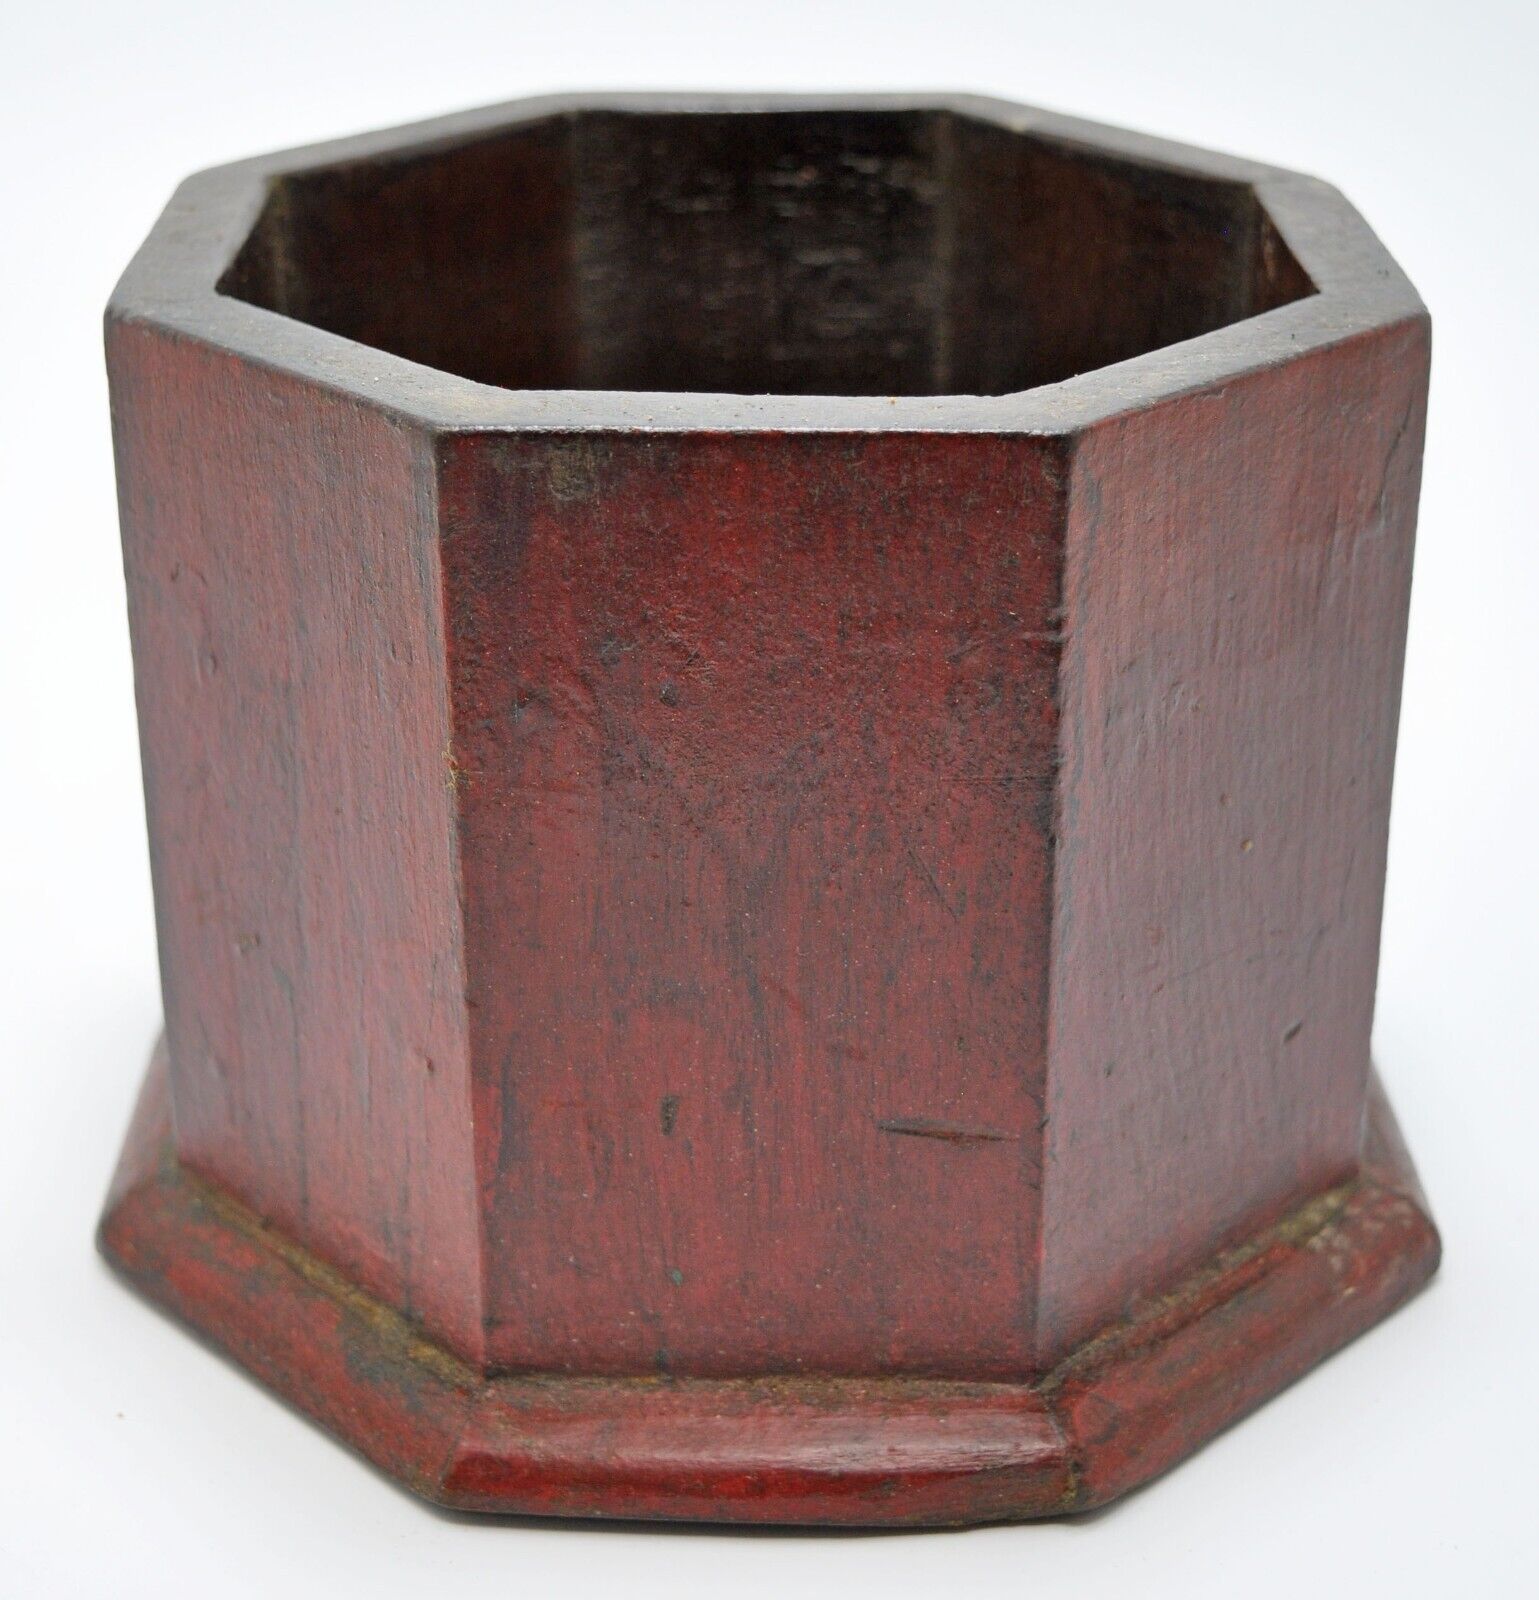 Vintage Wooden Small Octagonal Pot Original Old Hand Crafted